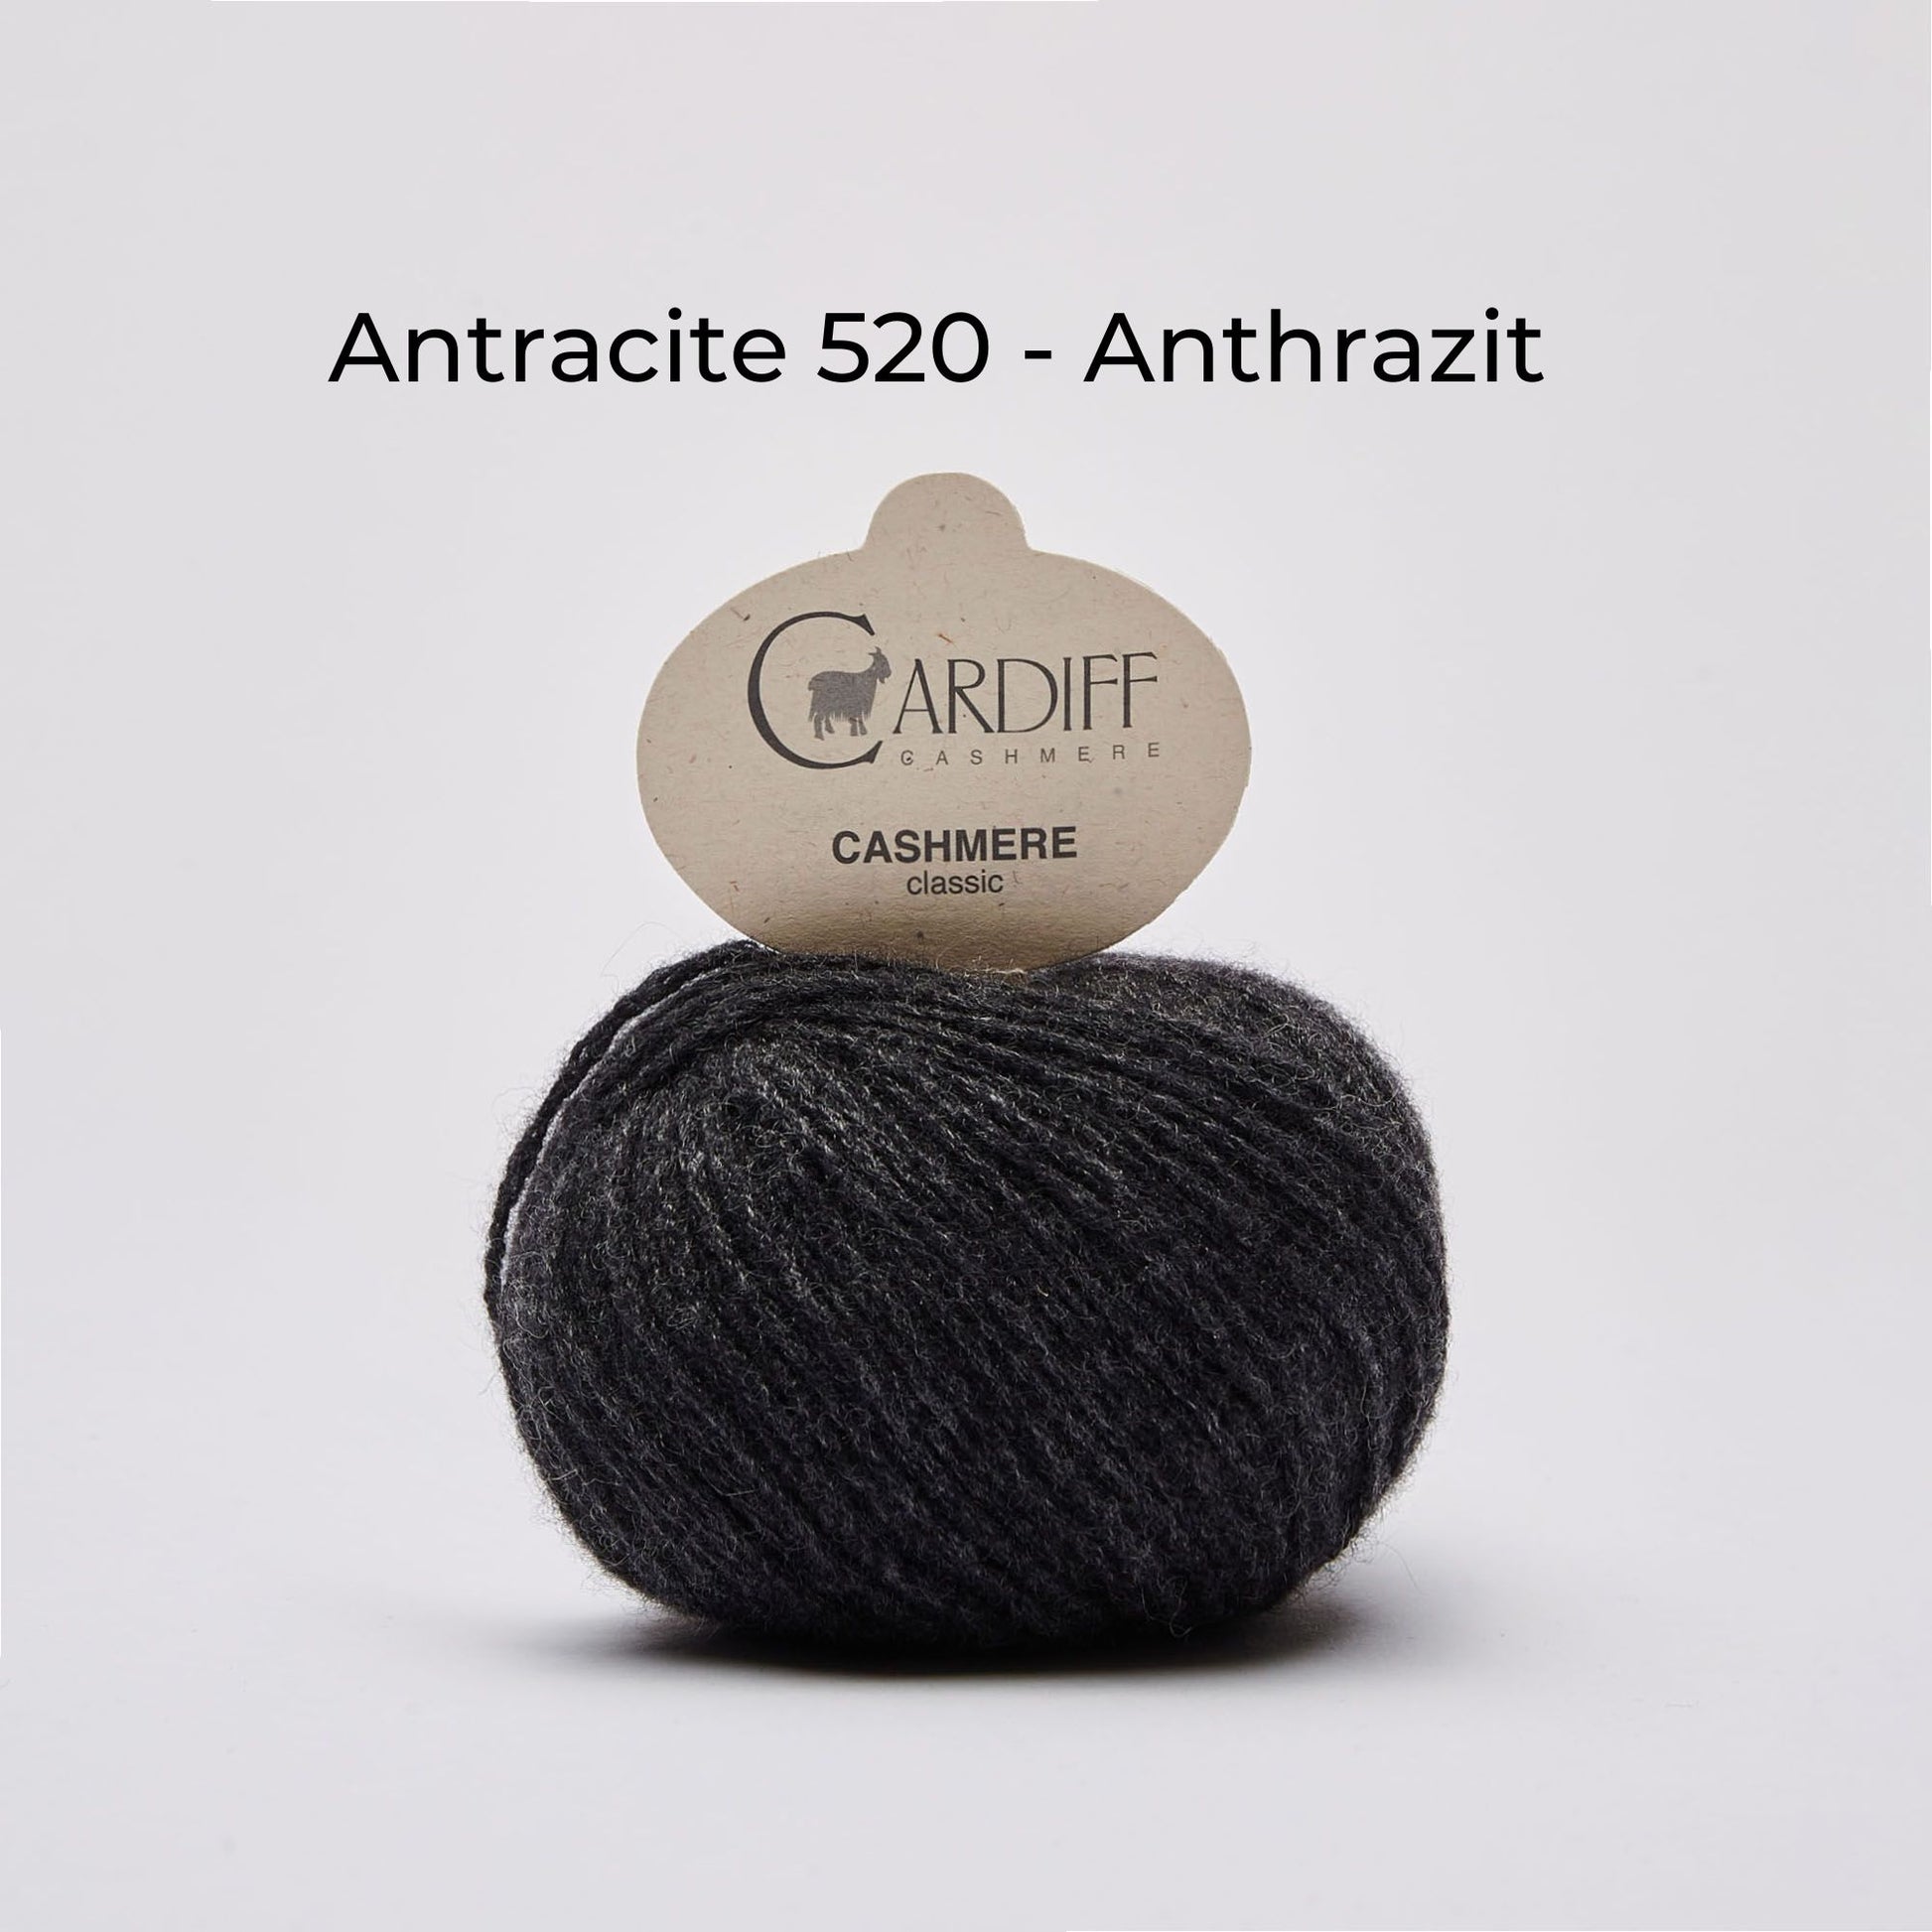 Wollknäuel, Cardiff Cashmere Classic, Farbe Antracite 520, Anthrazit